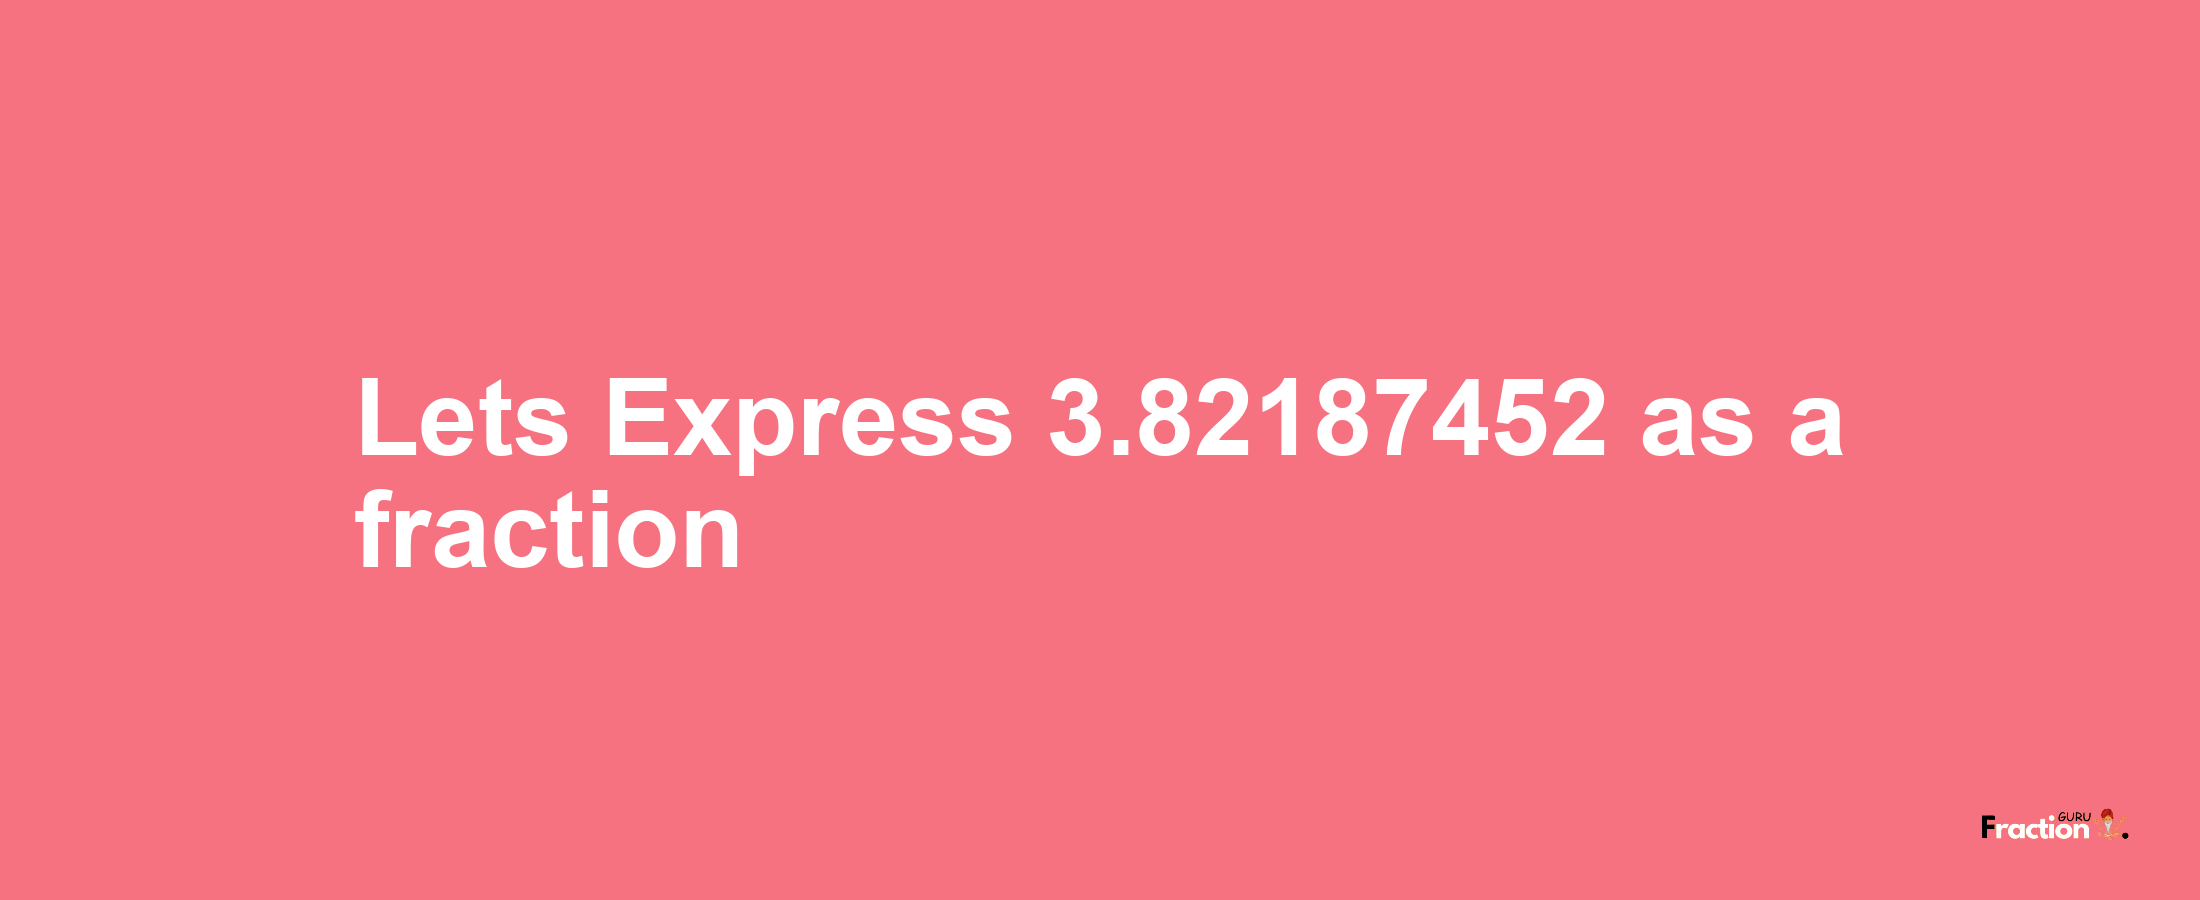 Lets Express 3.82187452 as afraction